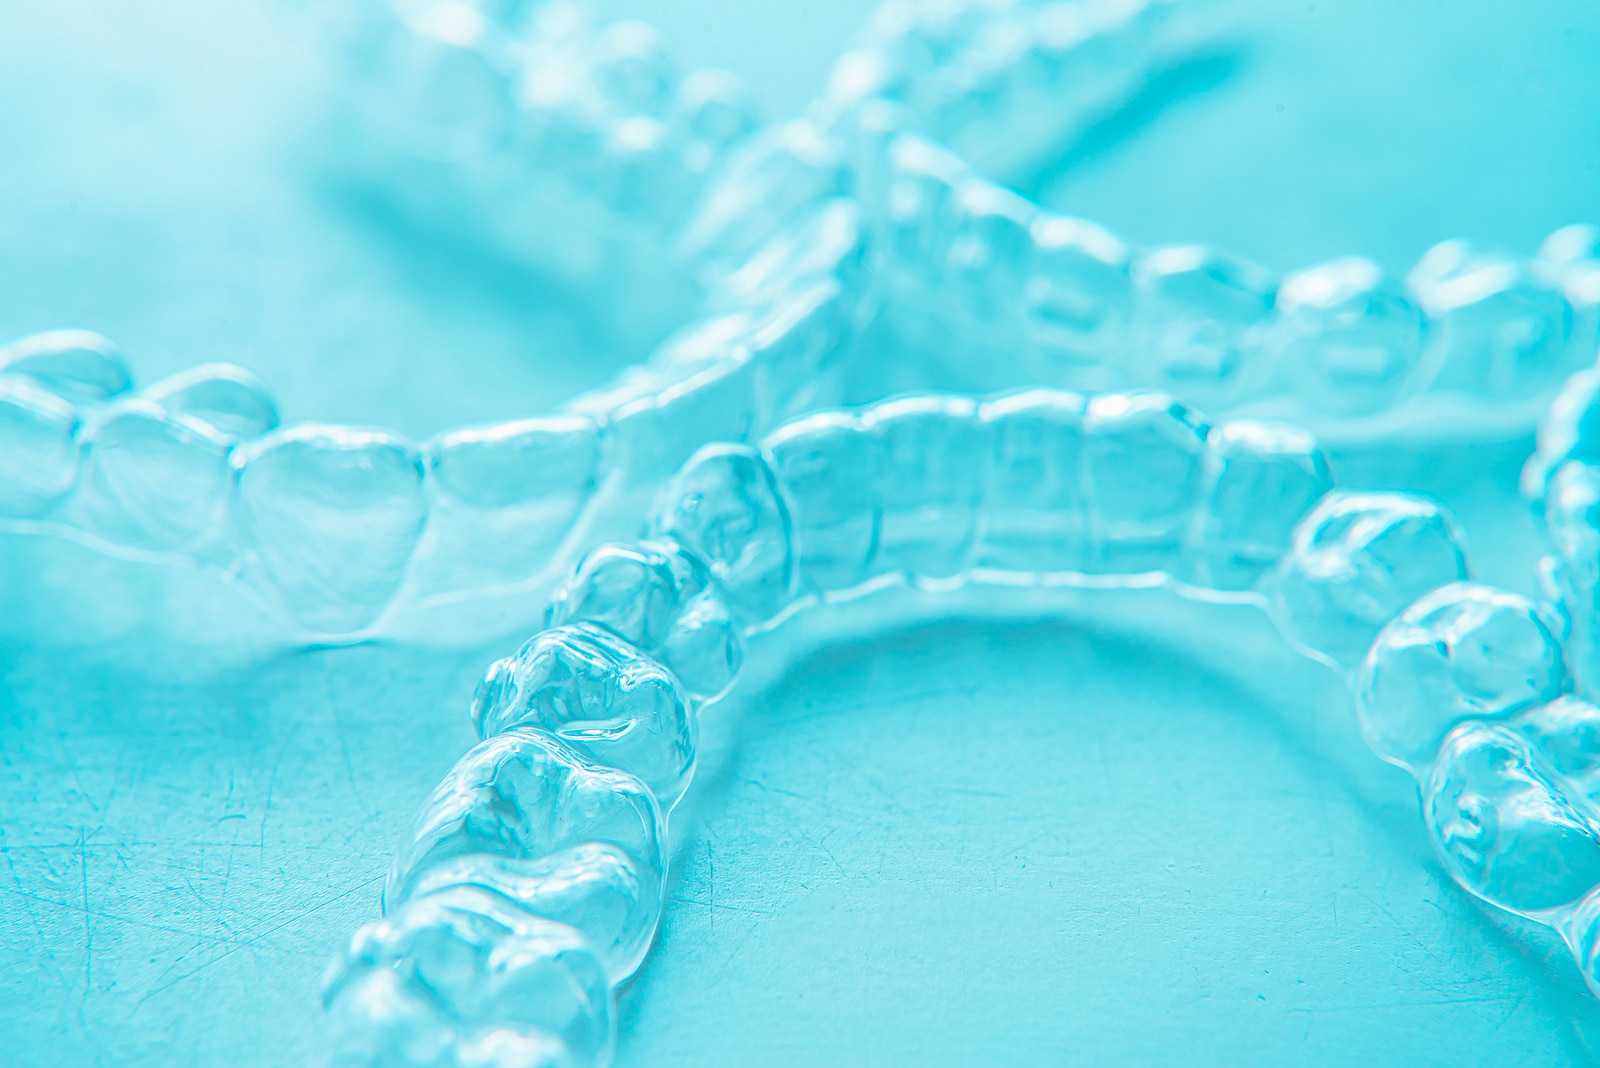 Am I a candidate for clear aligners?